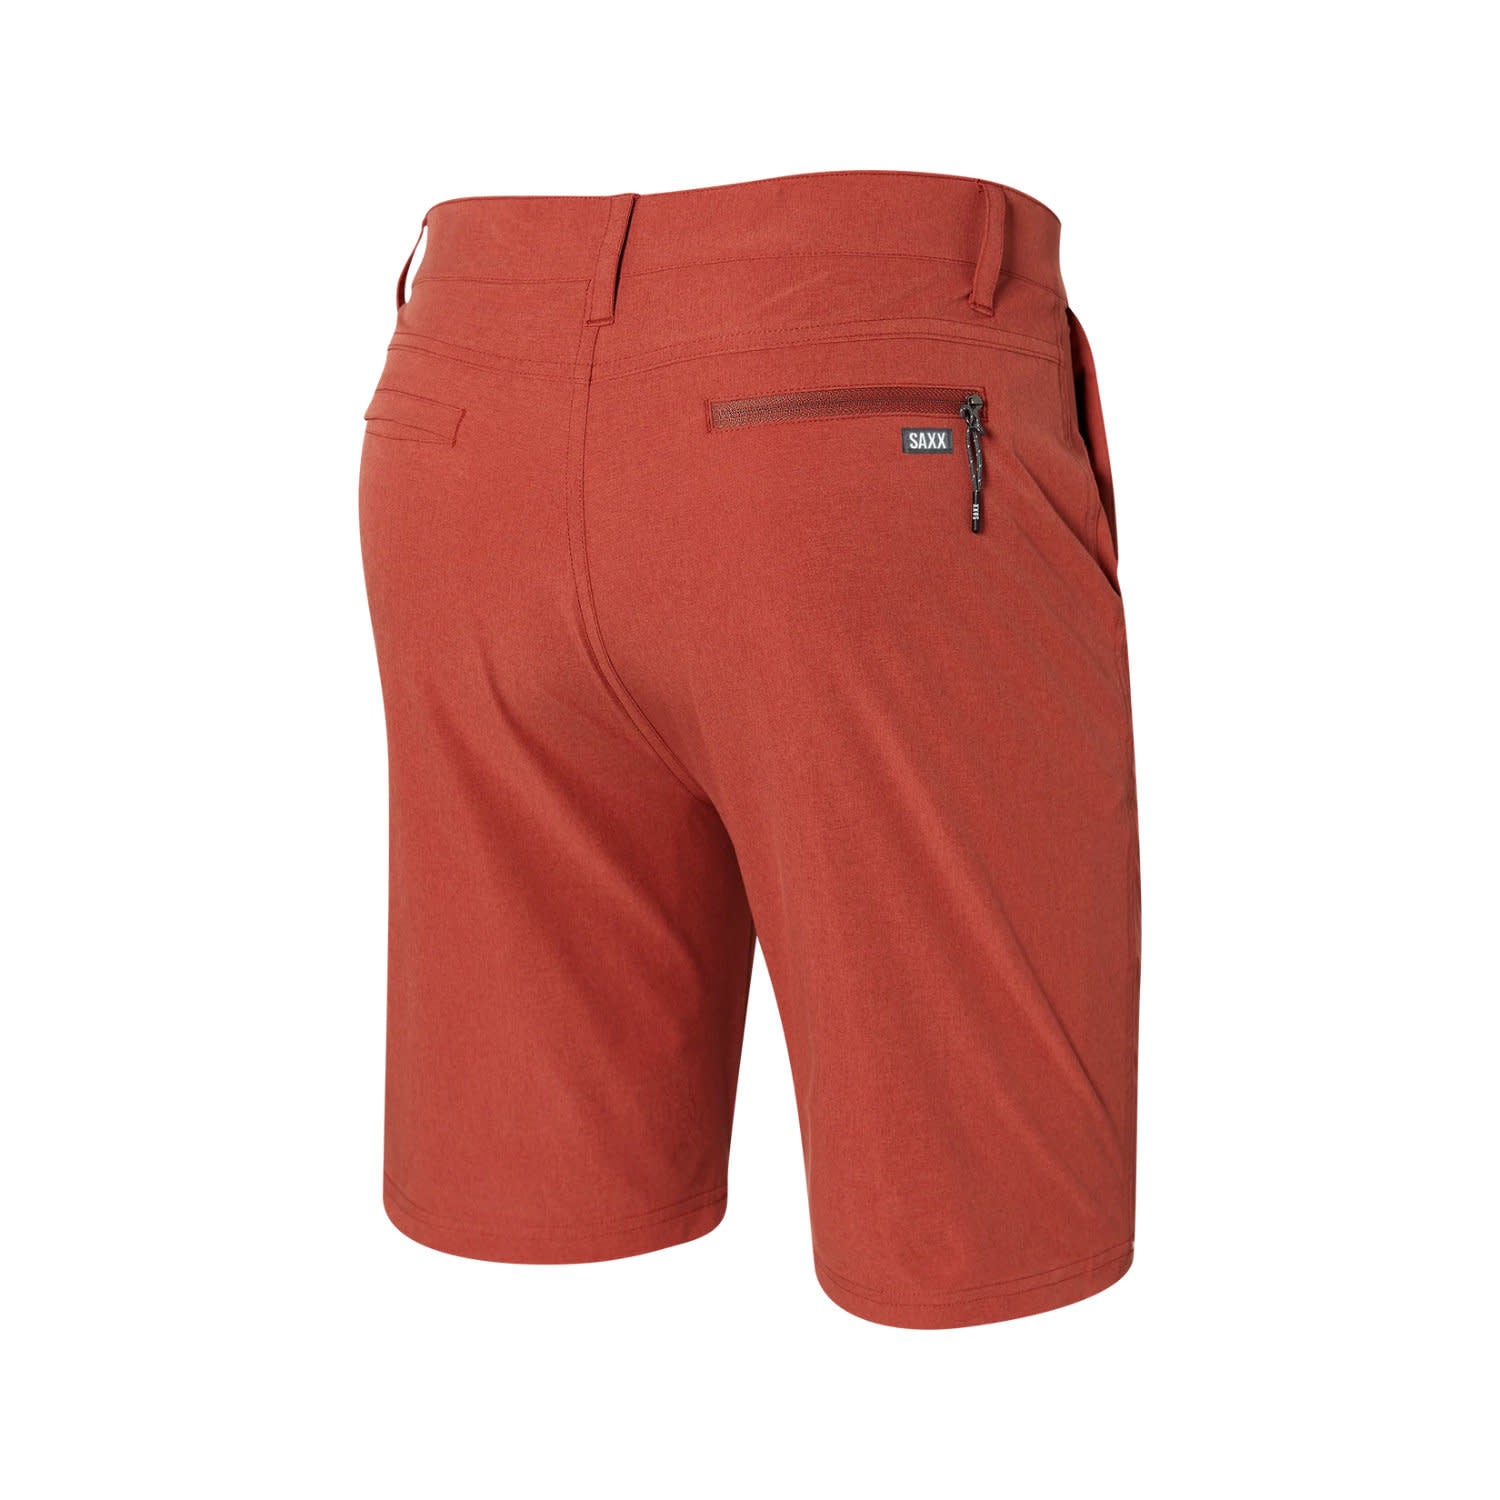 Saxx Go To Town 2N1 9" Shorts Desert Red